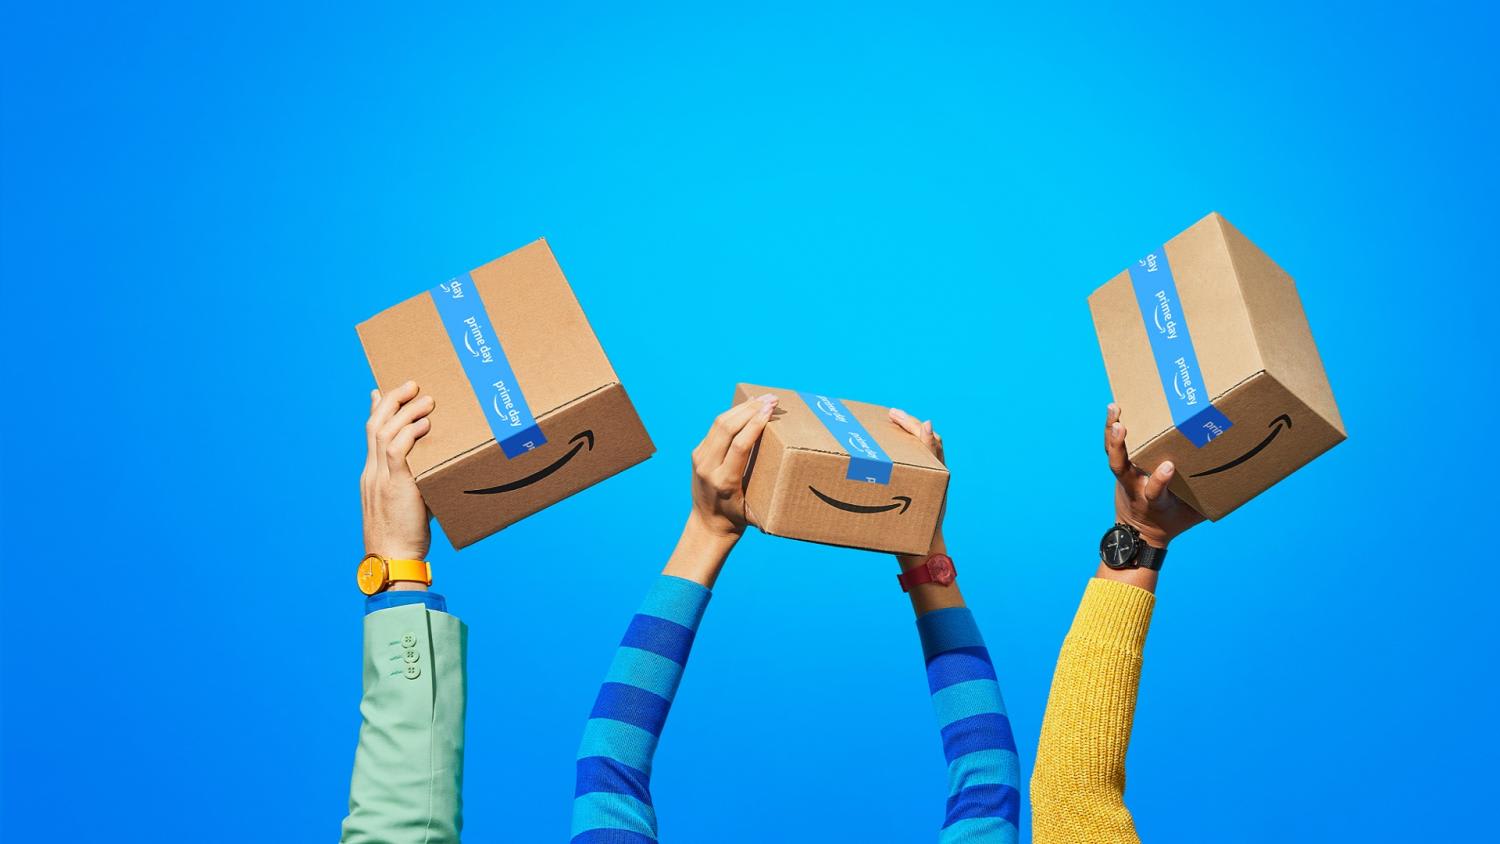 Ready yourself: It’s that time of the year for the biggest deals with Prime Day on Amazon.sg